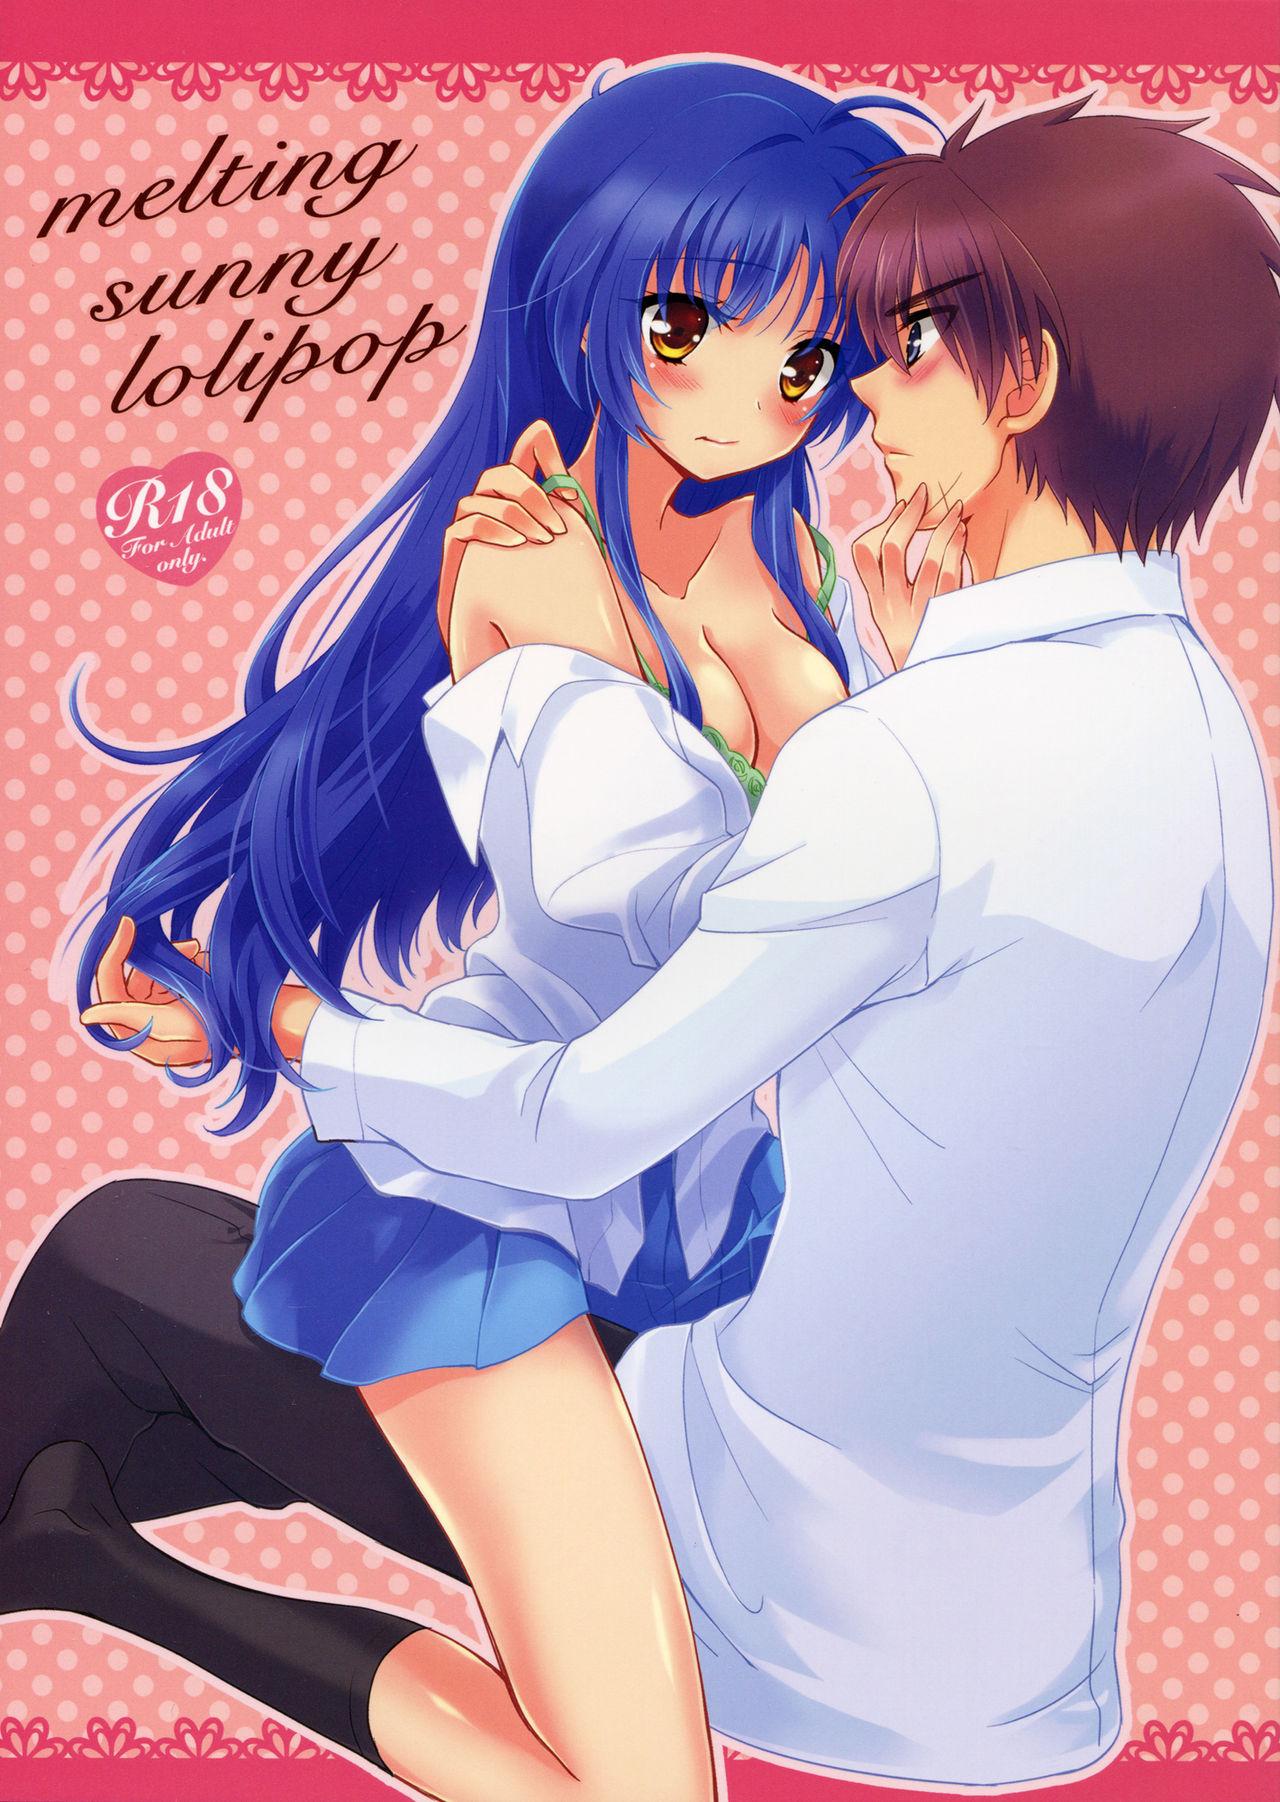 Canadian Melting Sunny Lolipop - Full metal panic Couples Fucking - Picture 1